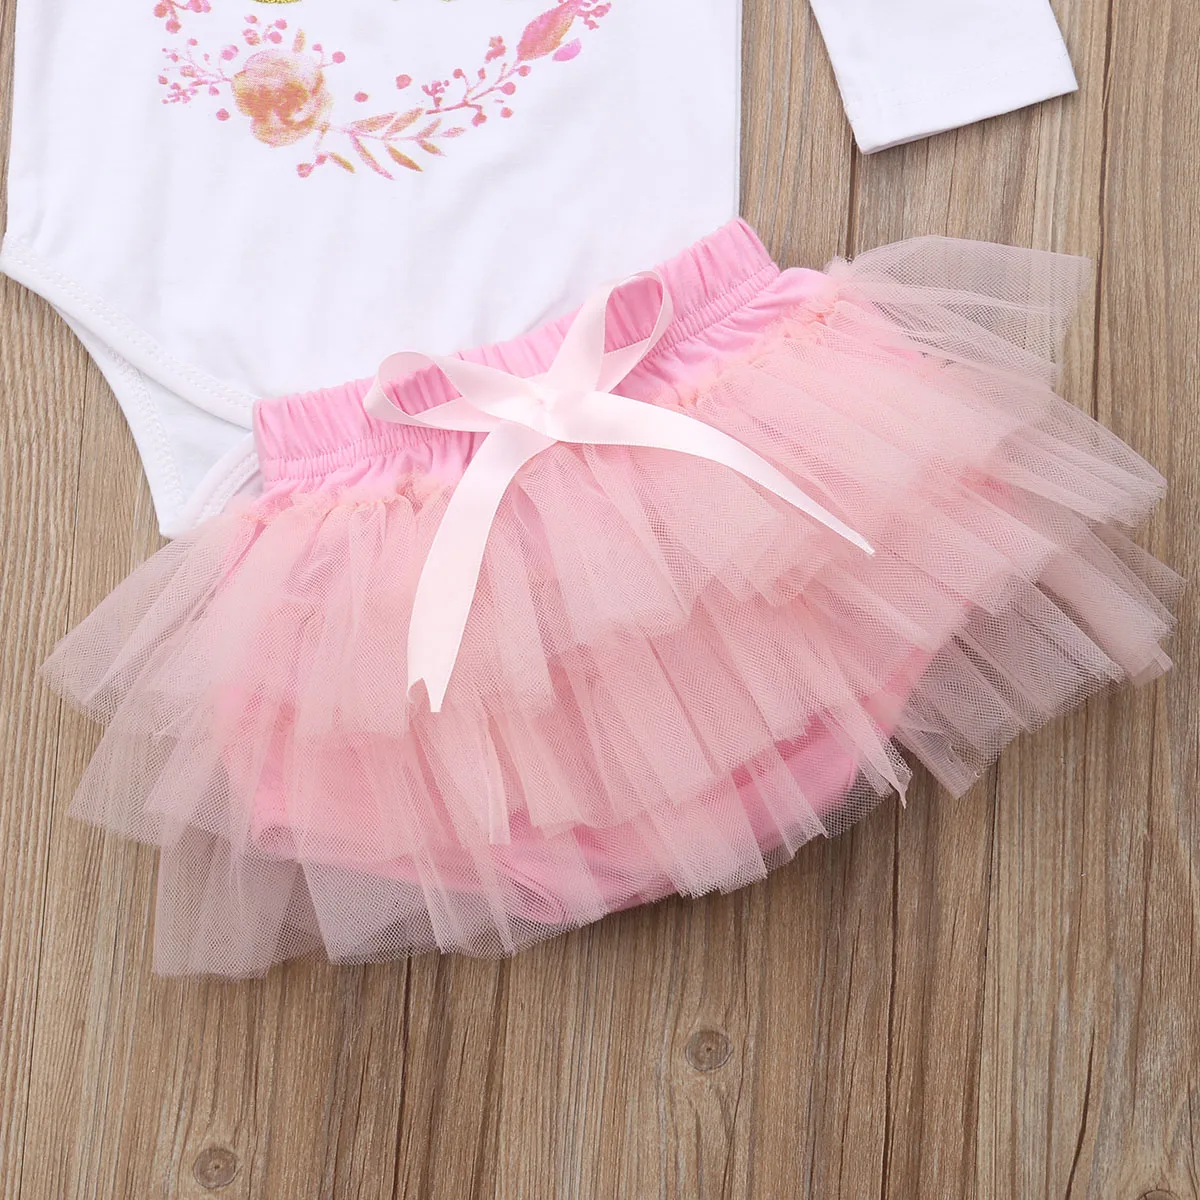 CANIS Baby Girl 1st Birthday Outfit Spring Autumn One Year Party Cake Smash Tutu Skirt Long Sleeve Ruffles Lovely Clothes Set Baby Clothing Set expensive